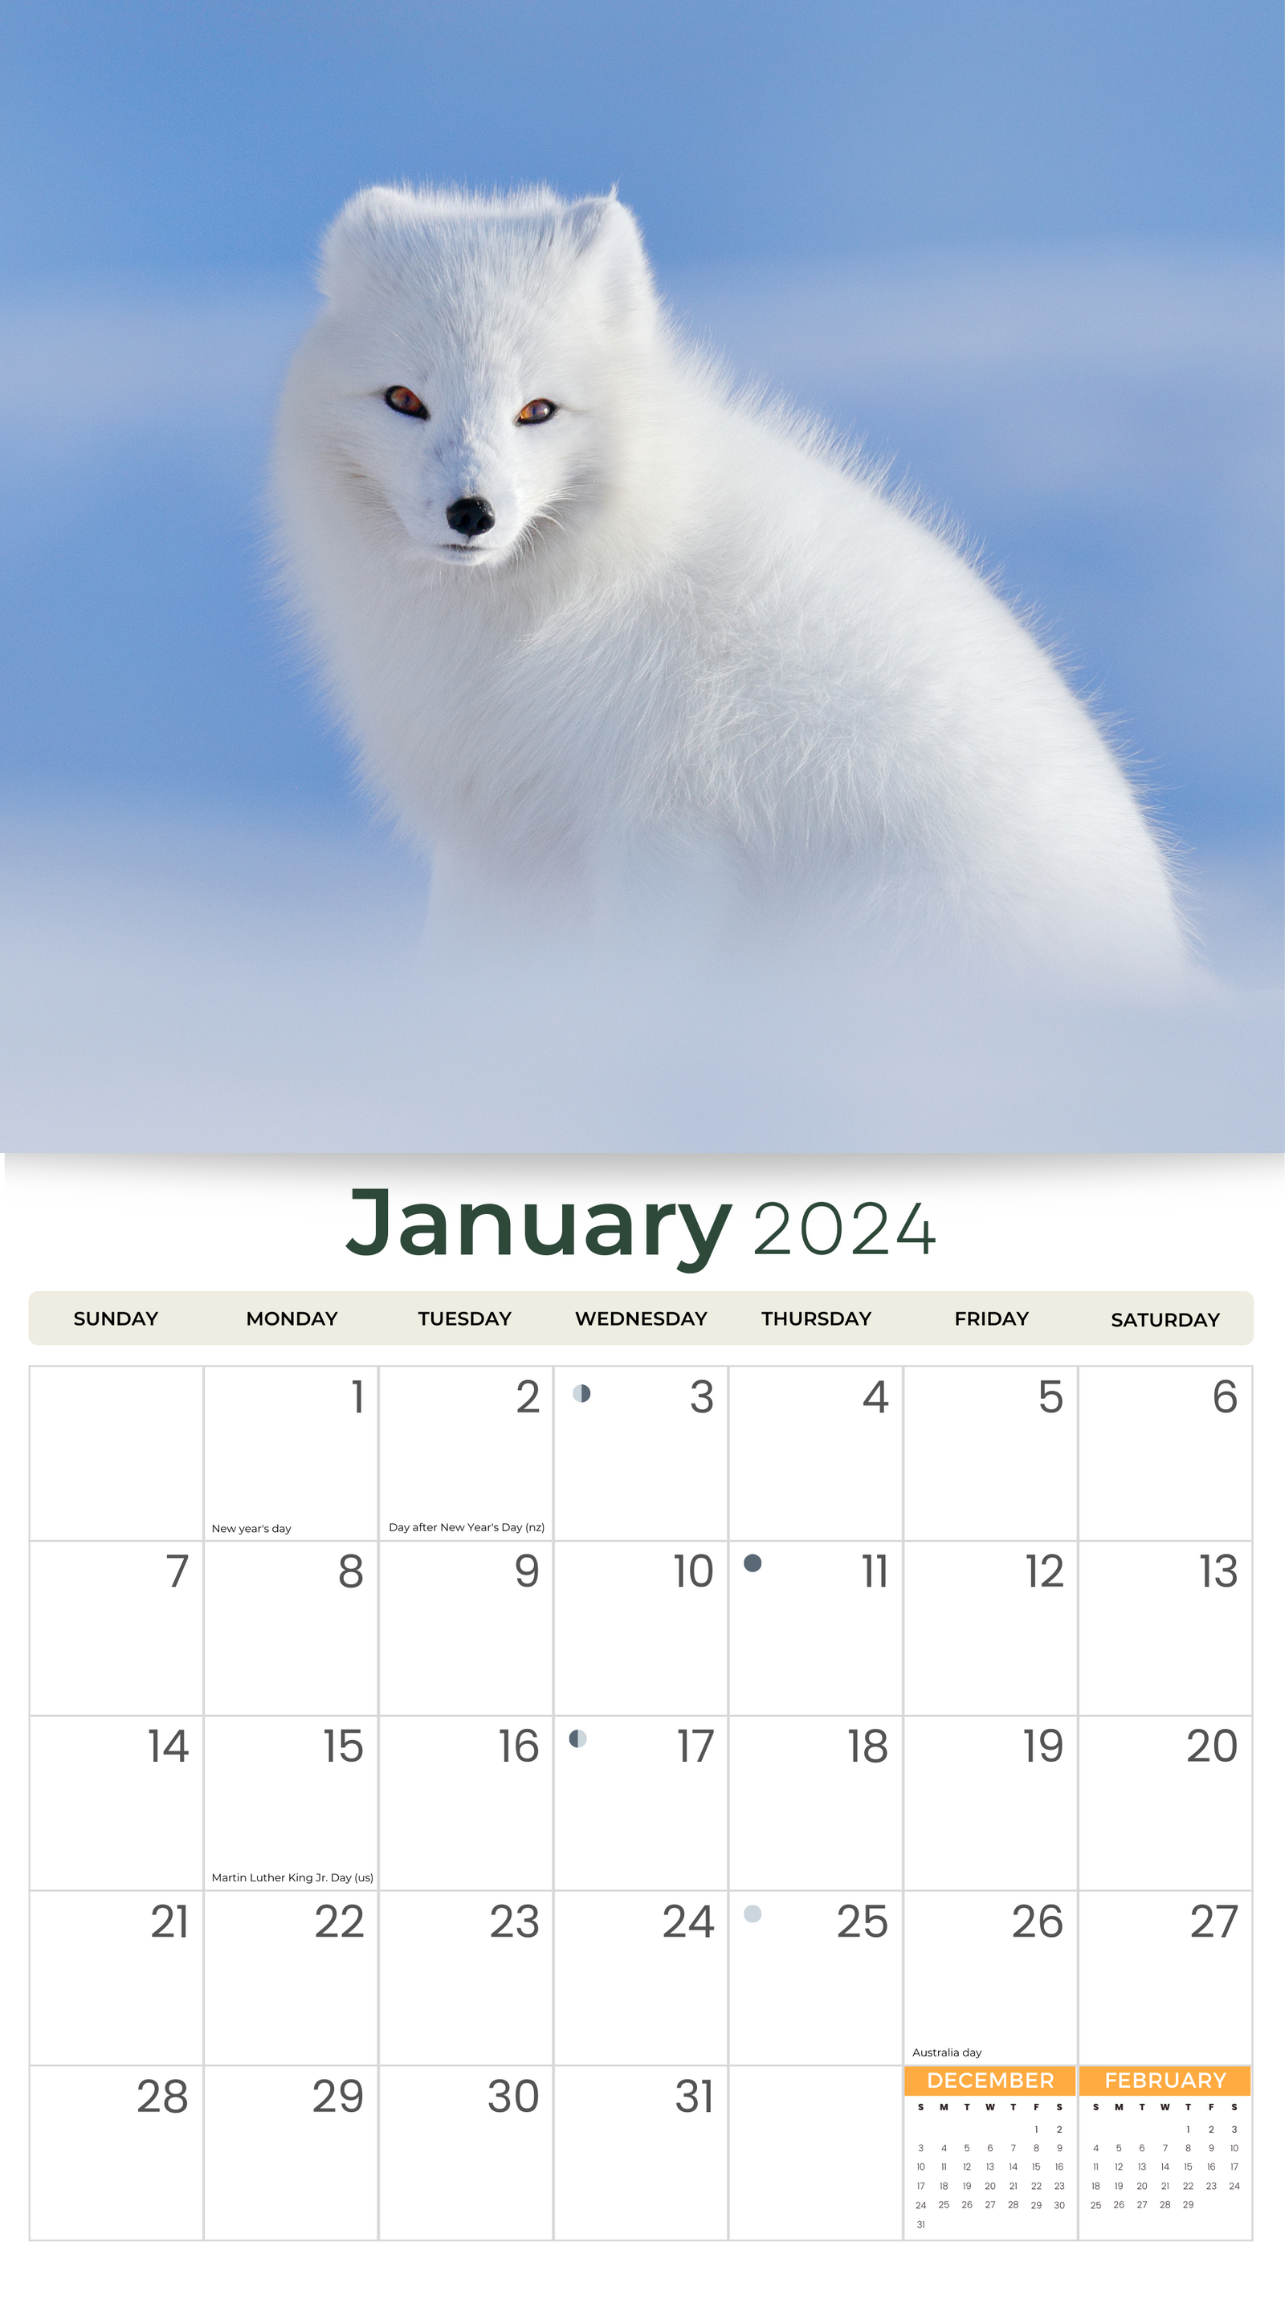 2024 Foxes - Deluxe Wall Calendar by Just Calendars - 16 Month - Plastic Free - Fox in the nature